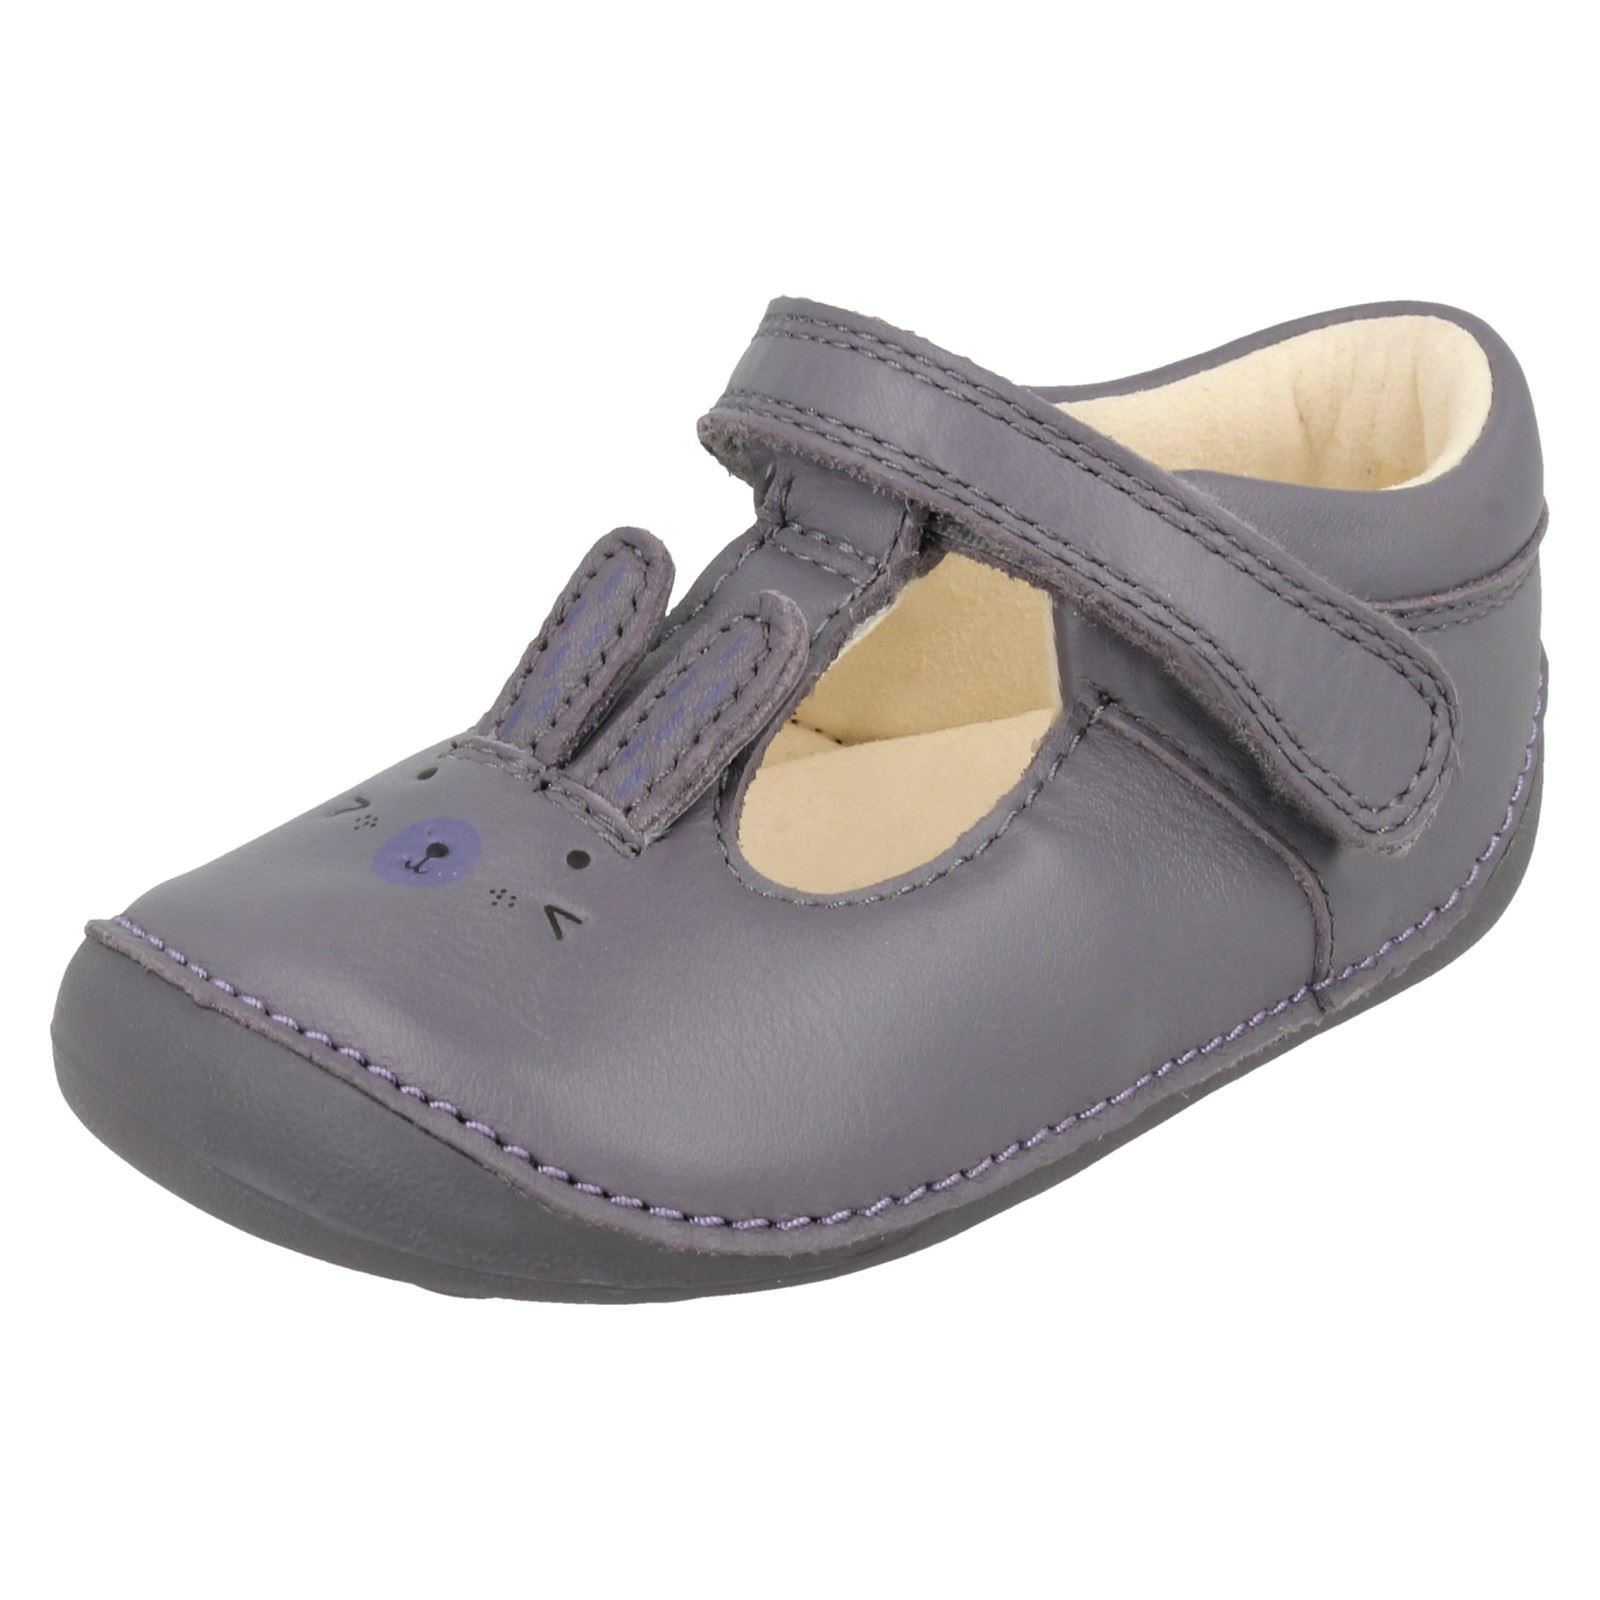 clarks first shoes girls